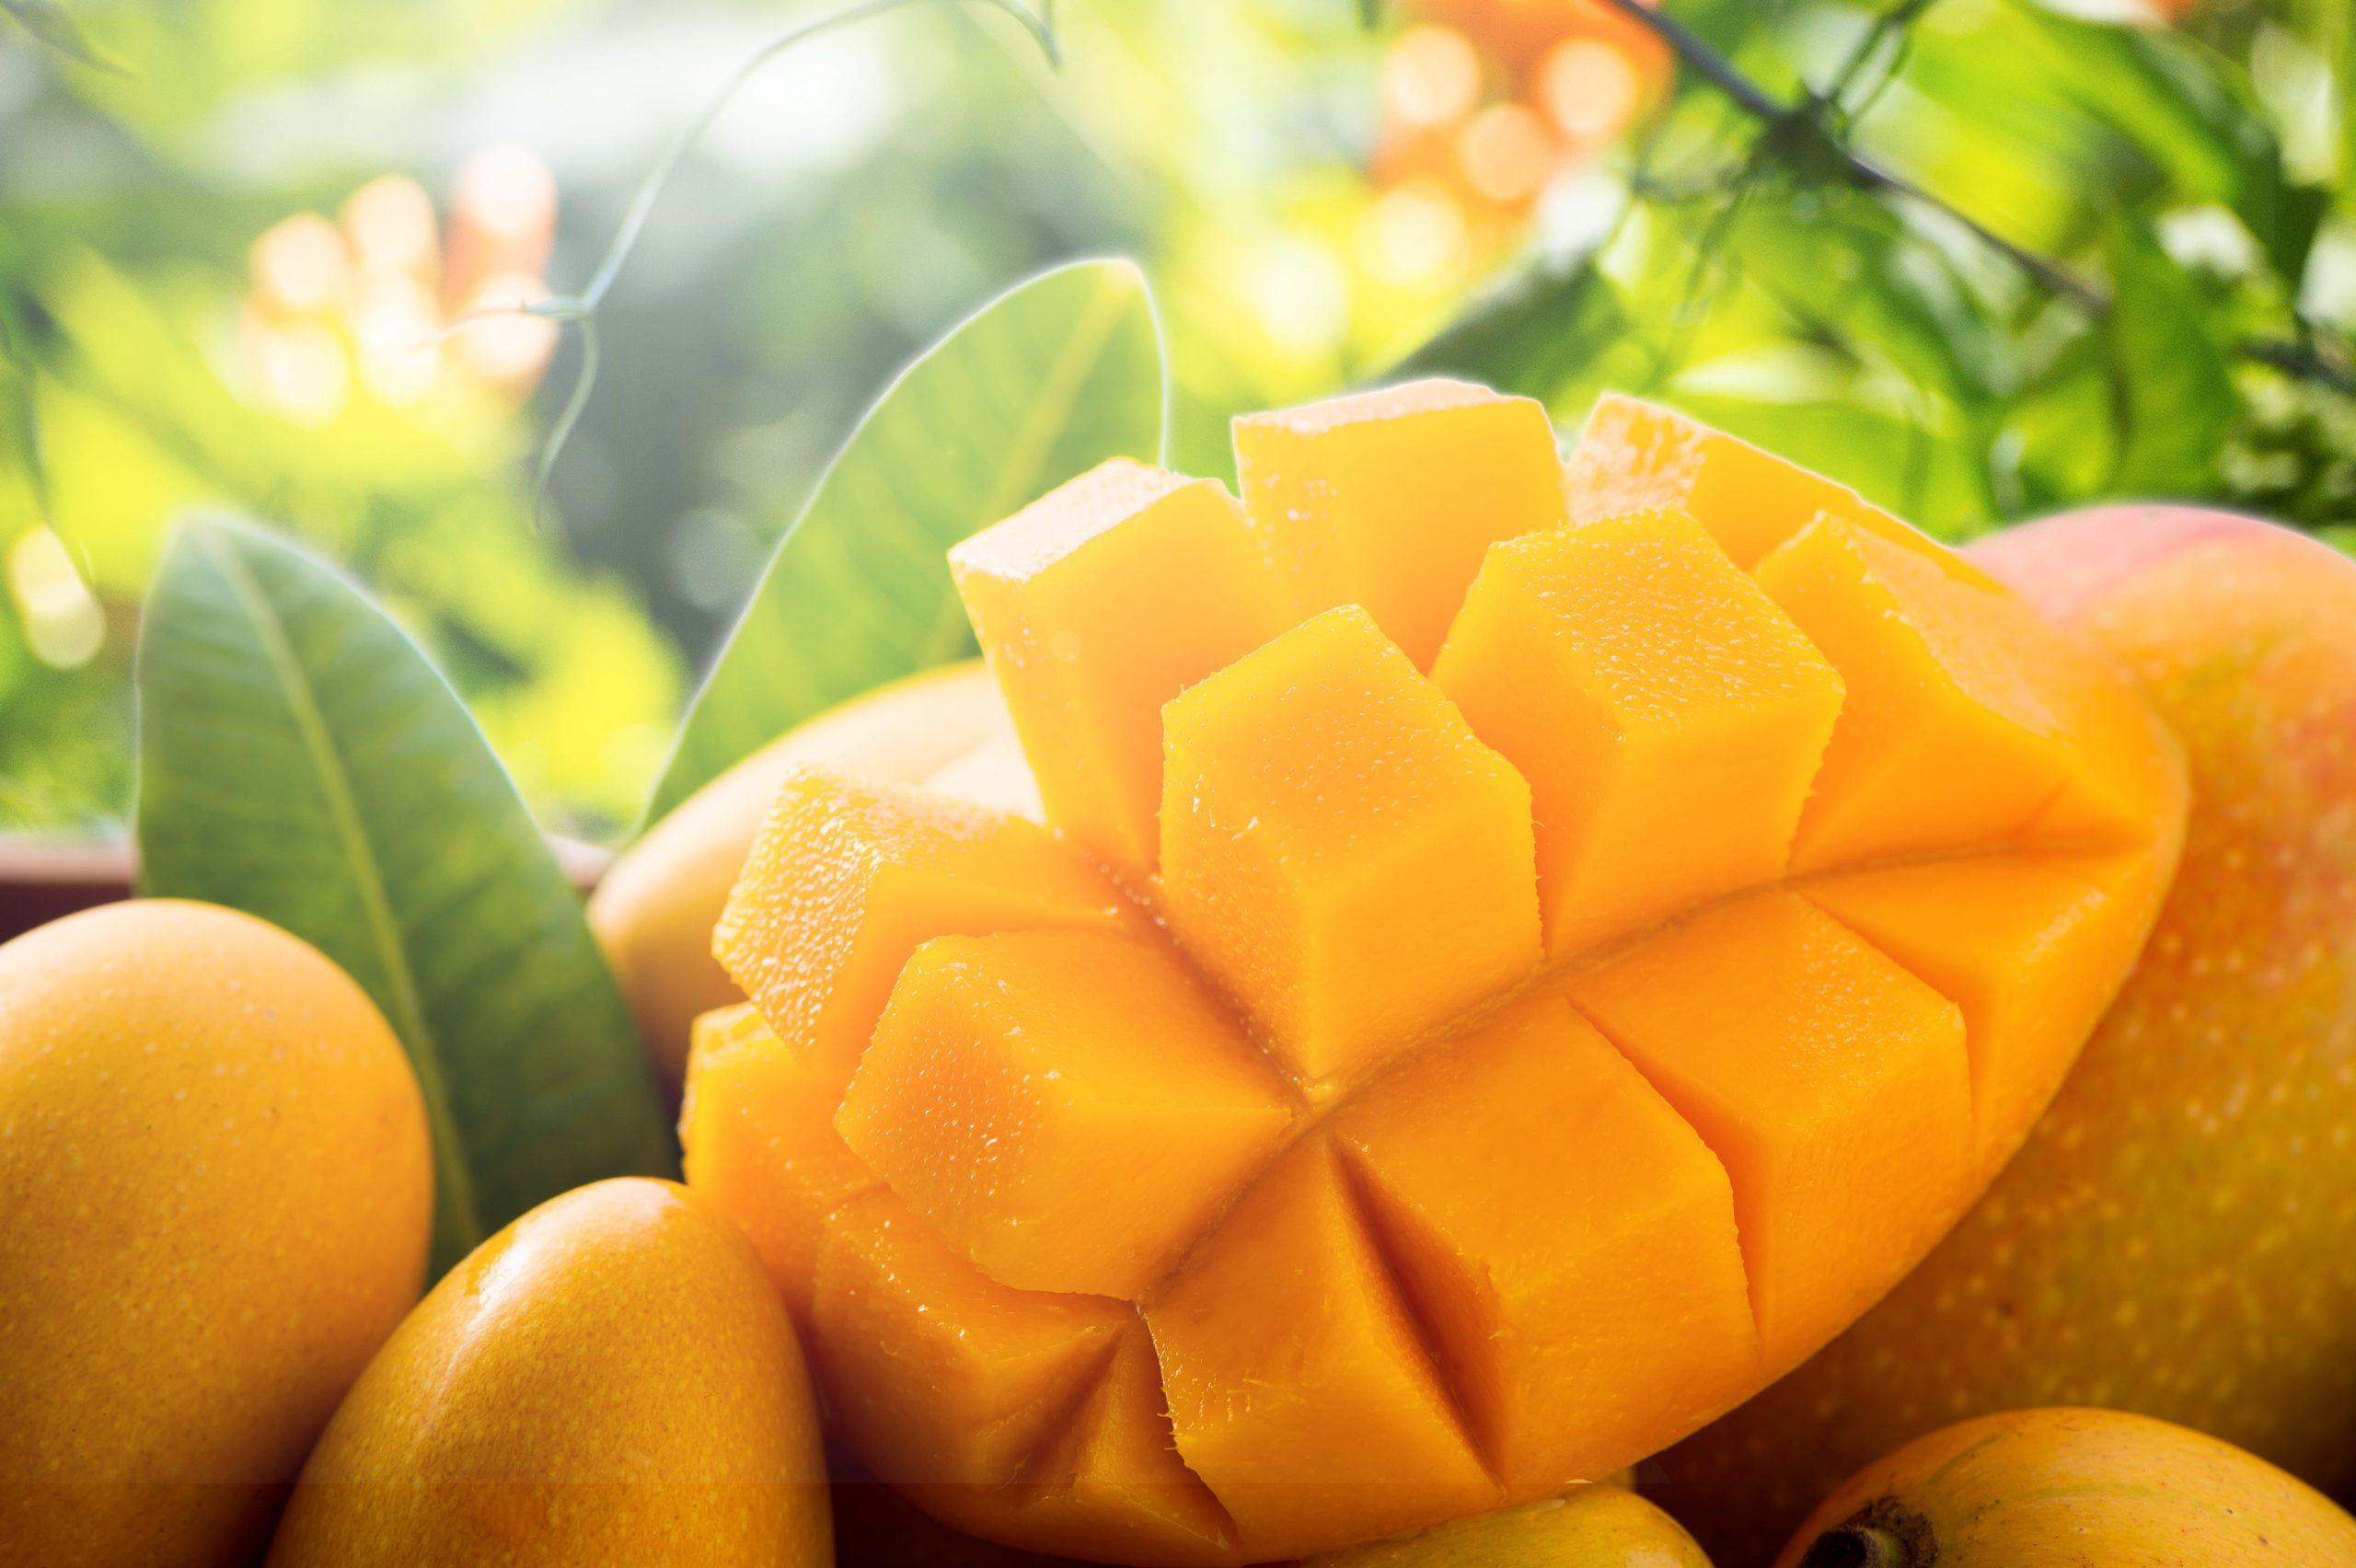 10 Benefits of Mango Juice Discover the Power of this Tropical Drink